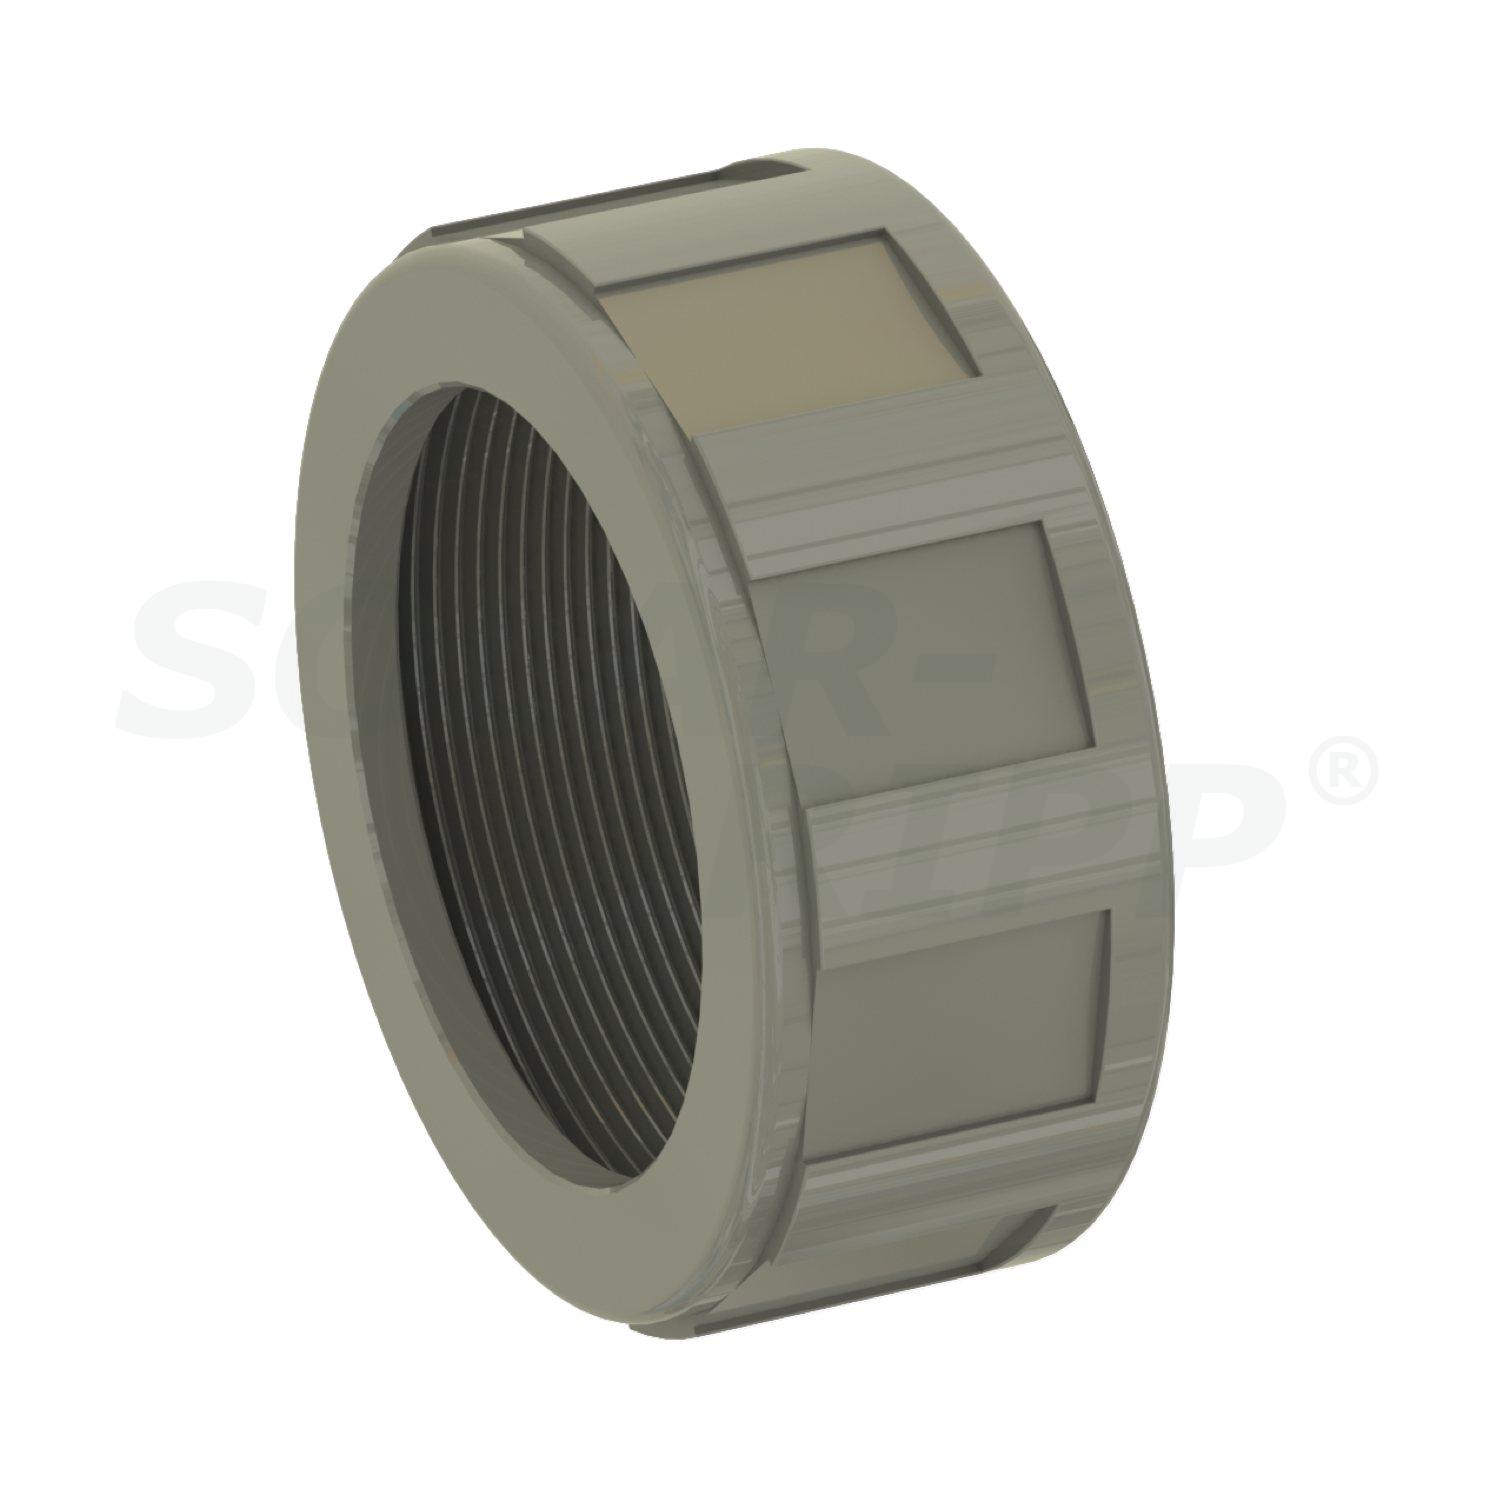 Ring nut for actuated 2 way valve 50mm